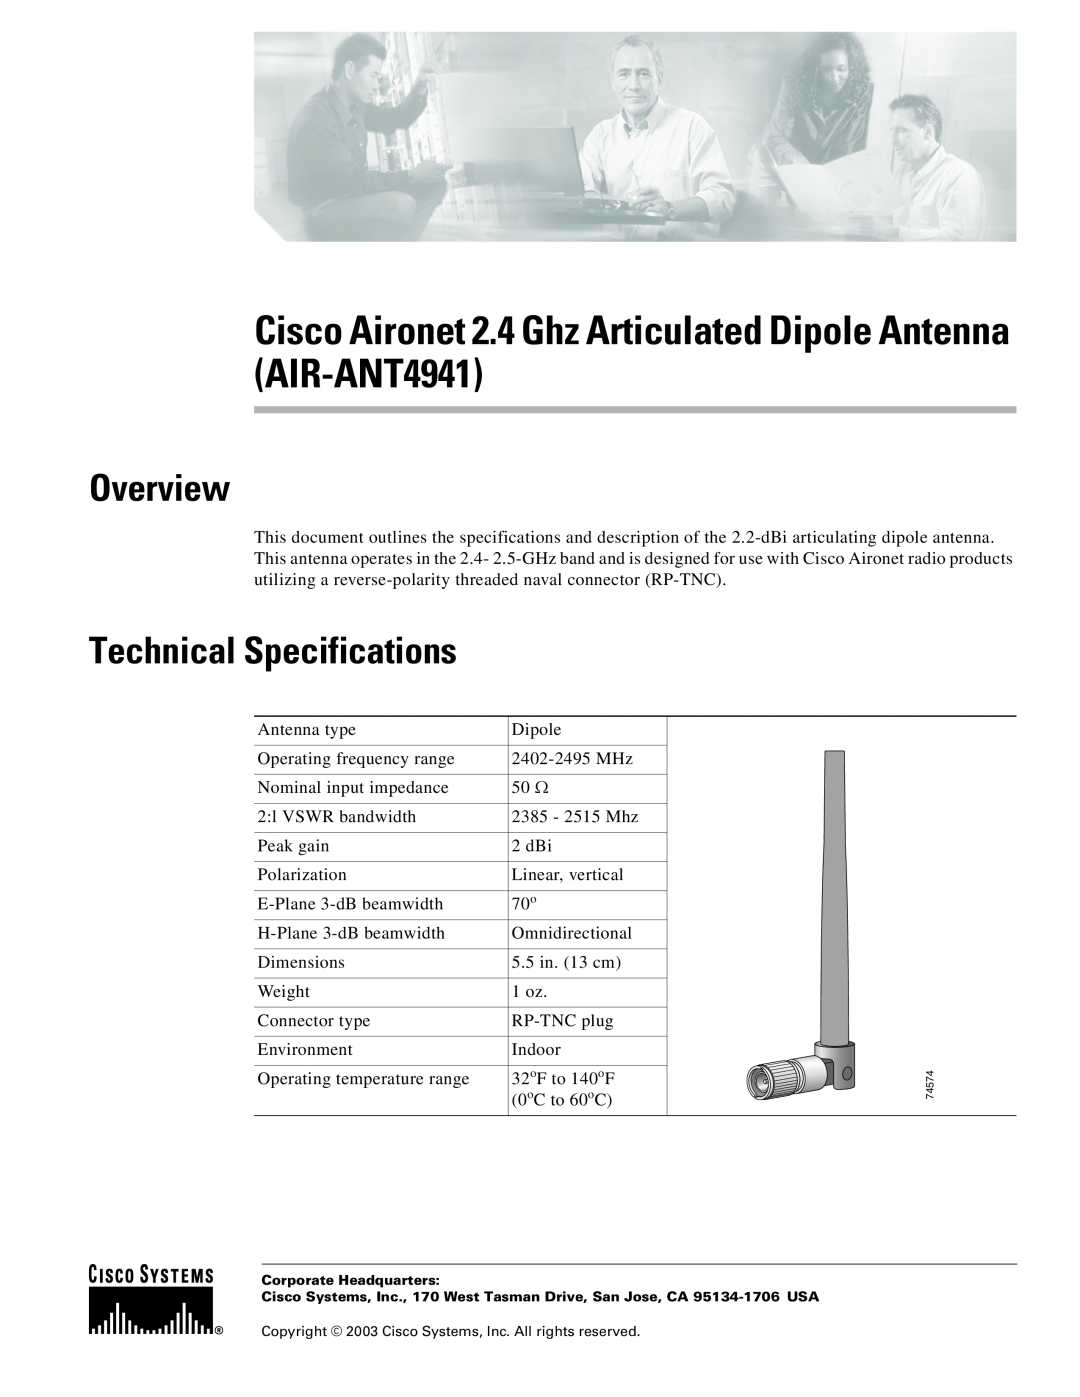 Cisco Systems AIR-ANT4941 technical specifications Overview, Technical Specifications 